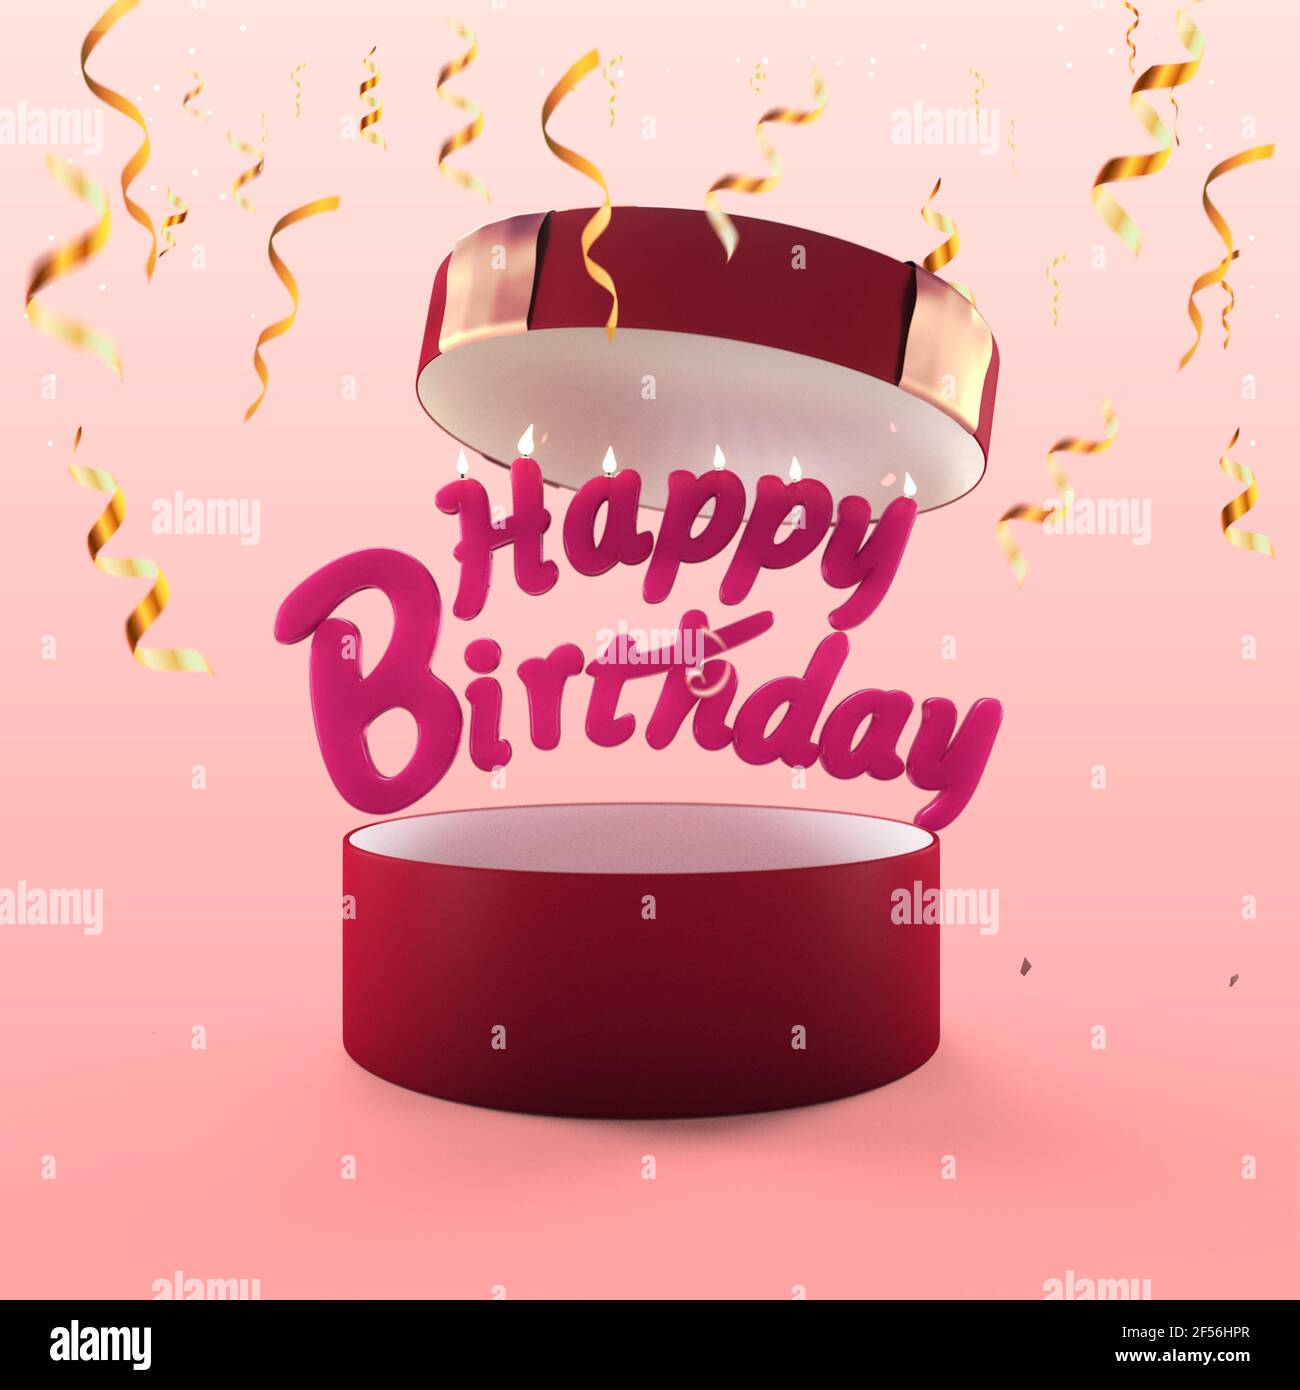 7,174,091 Birthday Images, Stock Photos, 3D objects, & Vectors